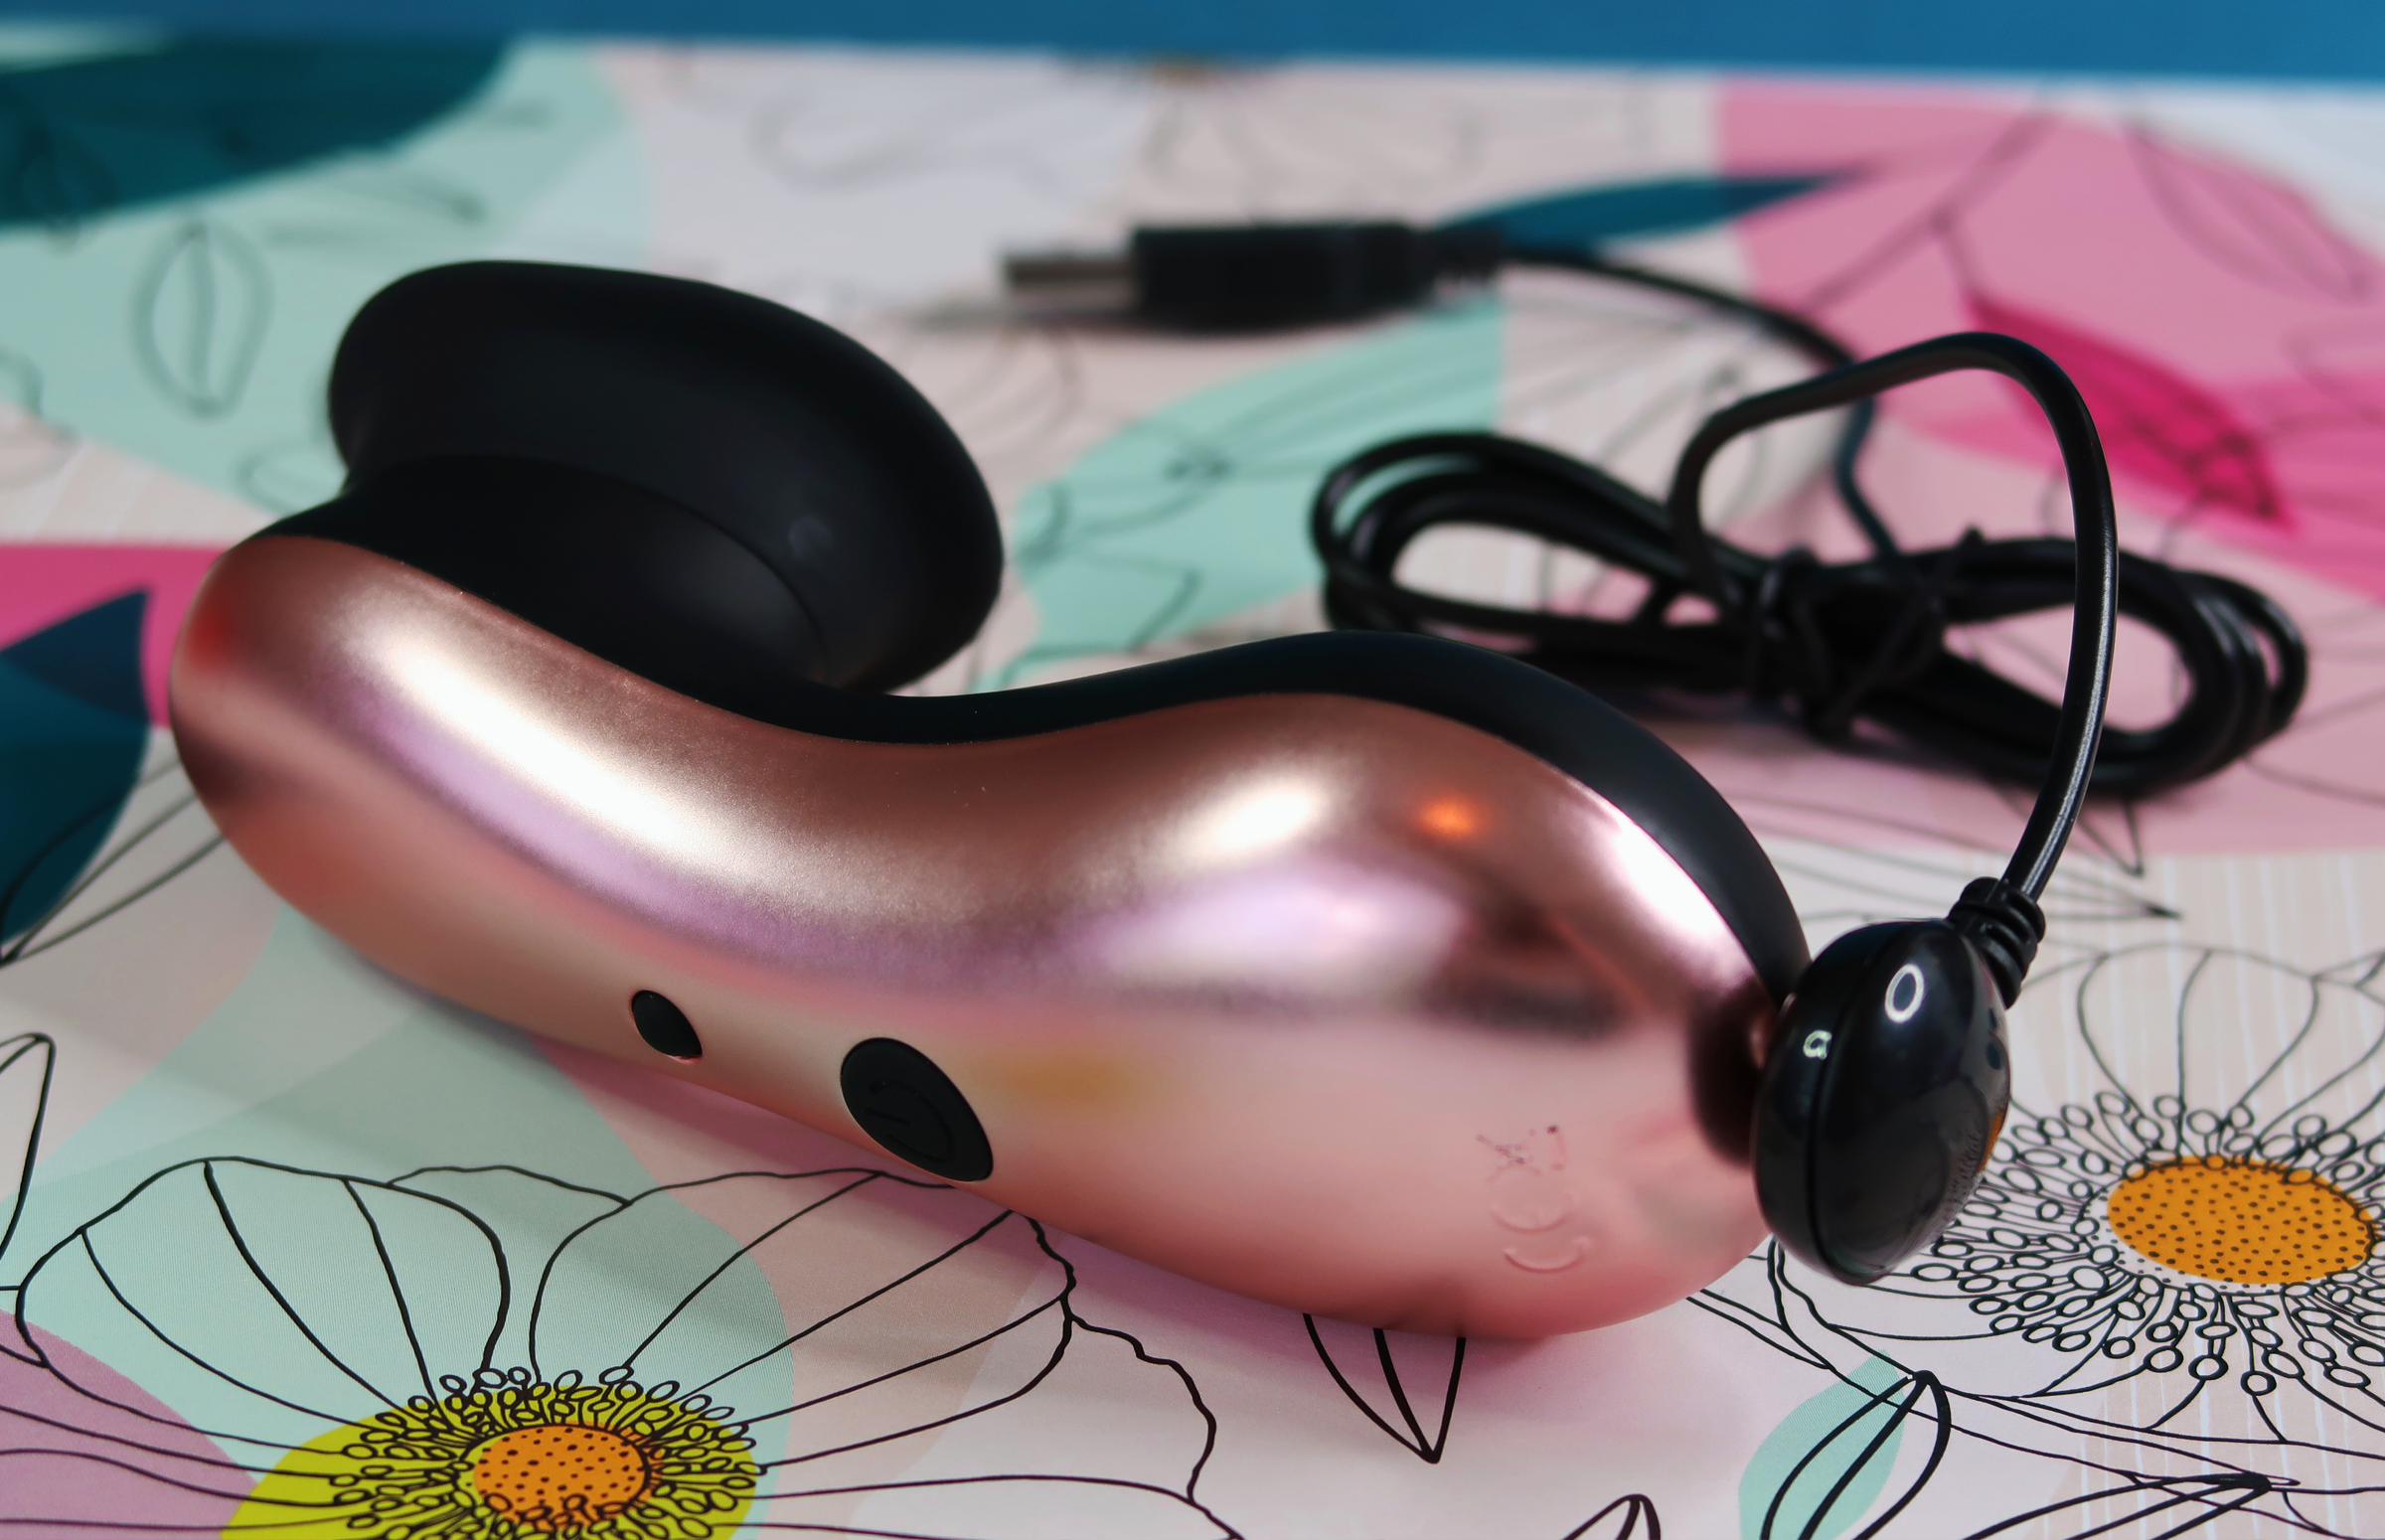 A close-up of the back of the Elegance Dreamy's rose gold back, as well as its usb charge cord.